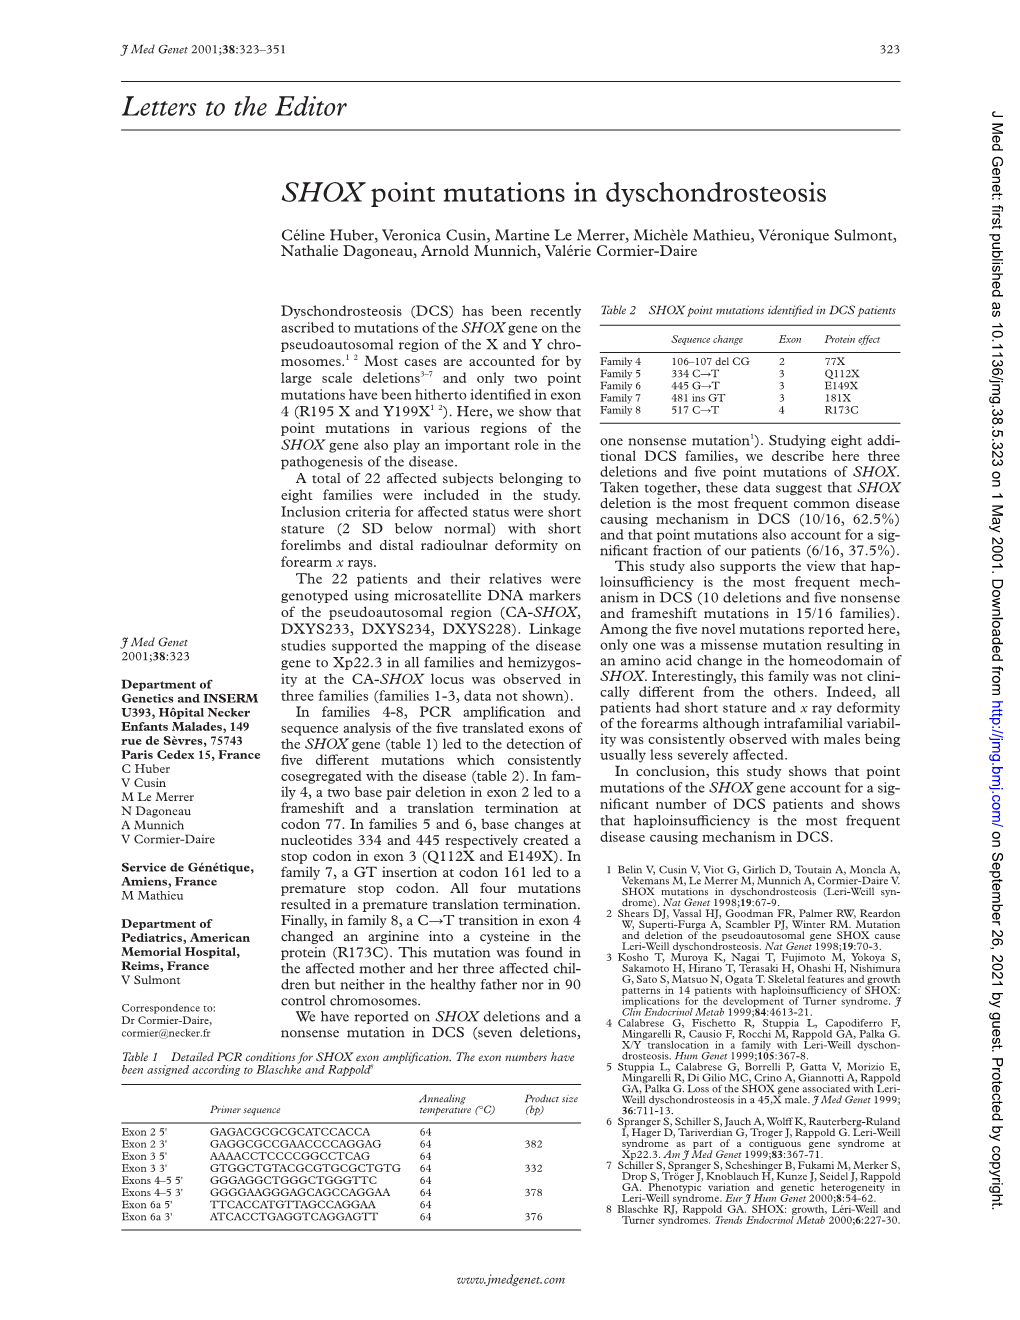 Letters to the Editor SHOX Point Mutations in Dyschondrosteosis